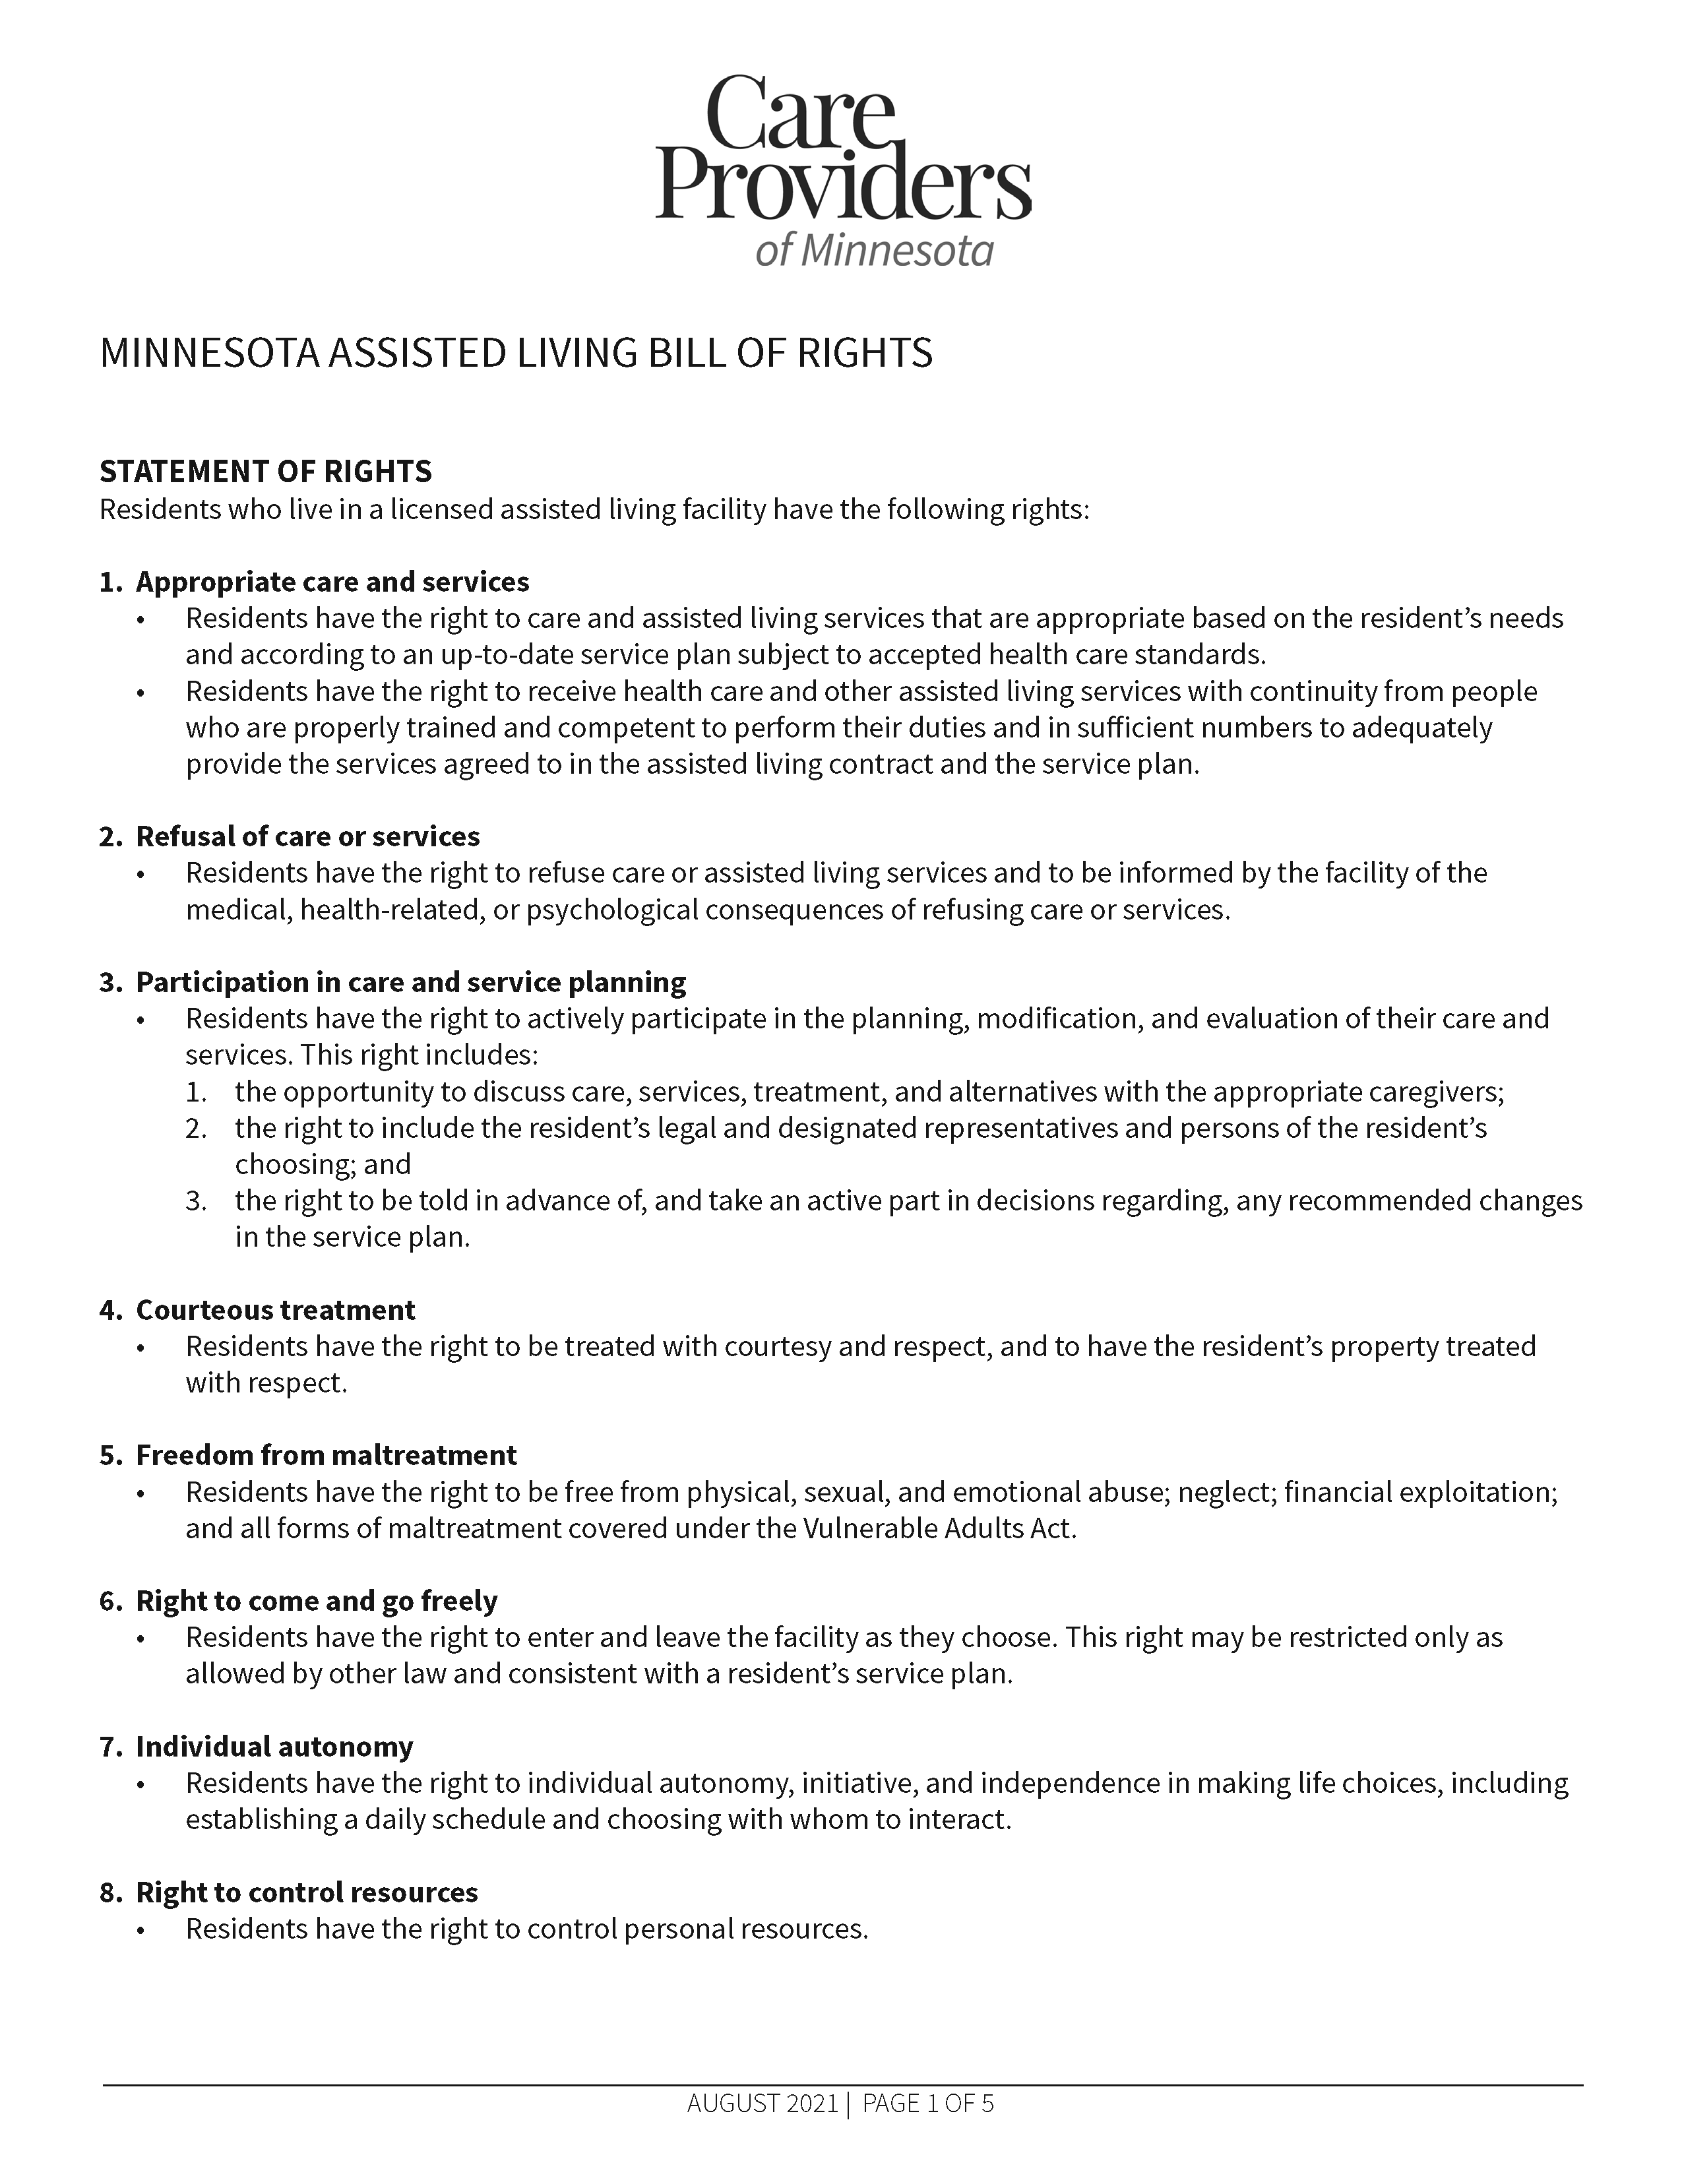 Minnesota Assisted Living Bill of Rights Form